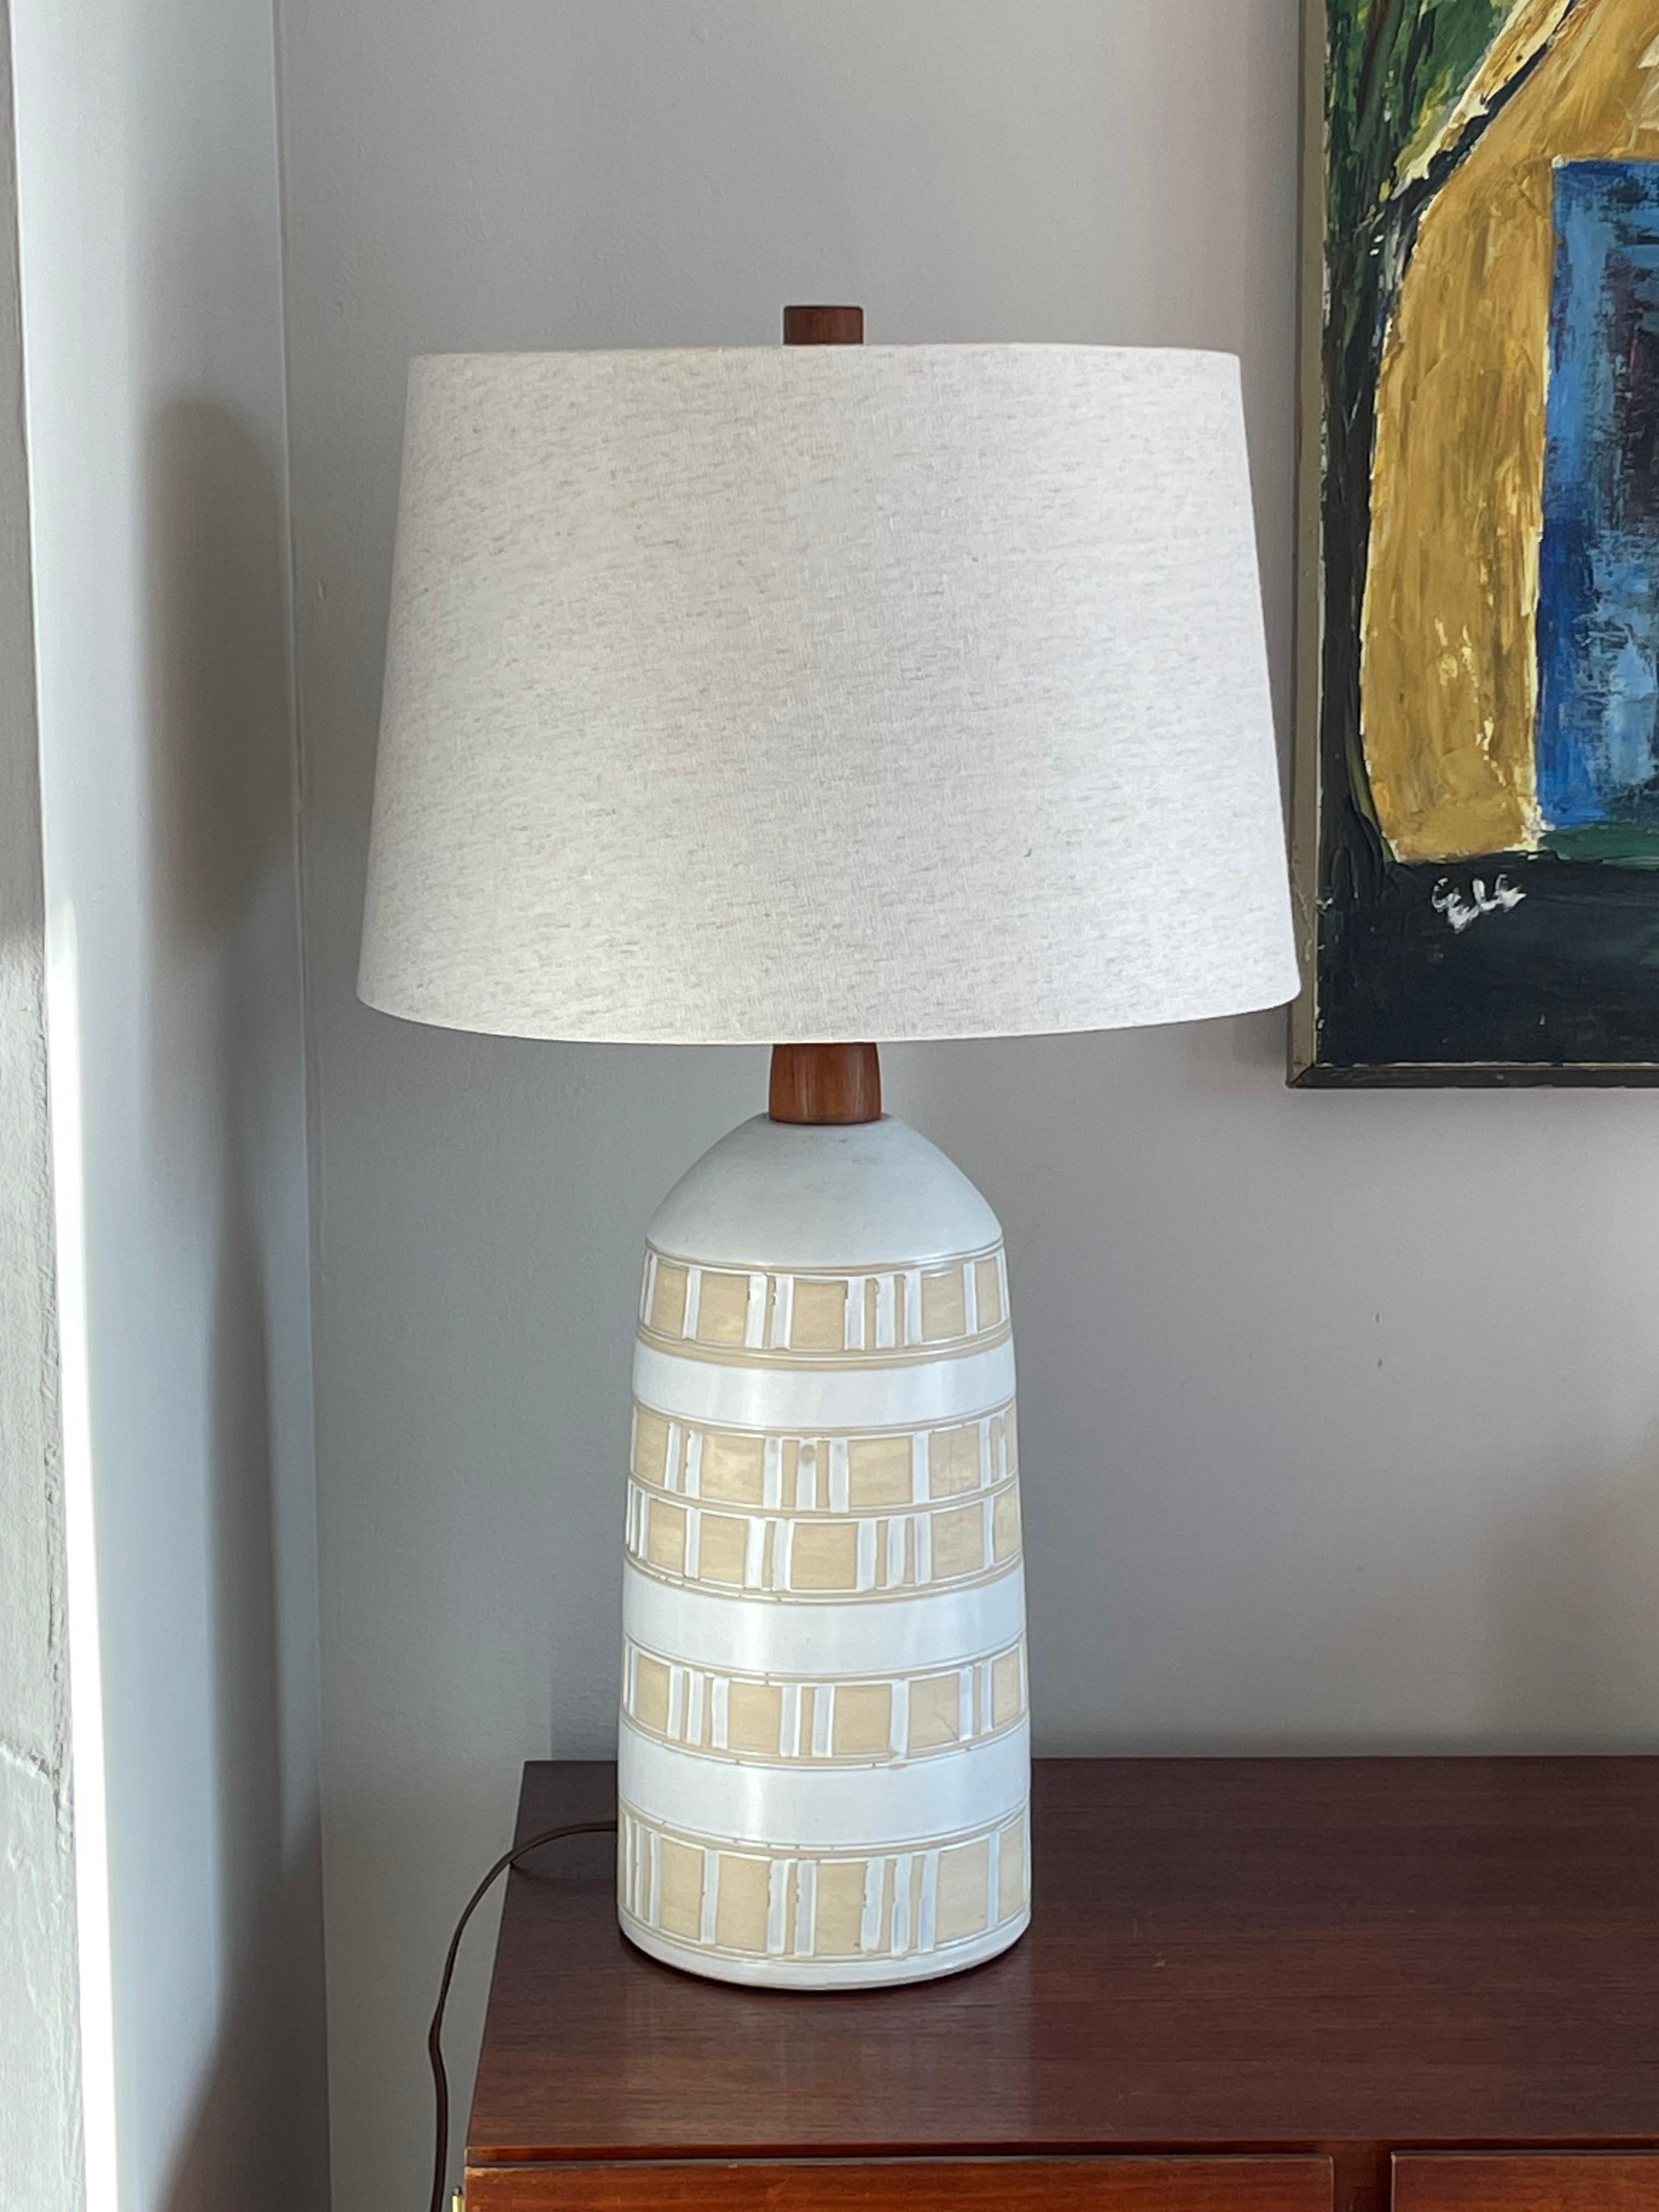 Wonderful minimalist table lamp designed by Jane and Gordon Martz for Marshall Studios. Features an organic palate with off white and bisque portions. Walnut neck and finial.

Overall
27” tall
15” wide

Ceramic 
13.75” tall
6.75” wide.